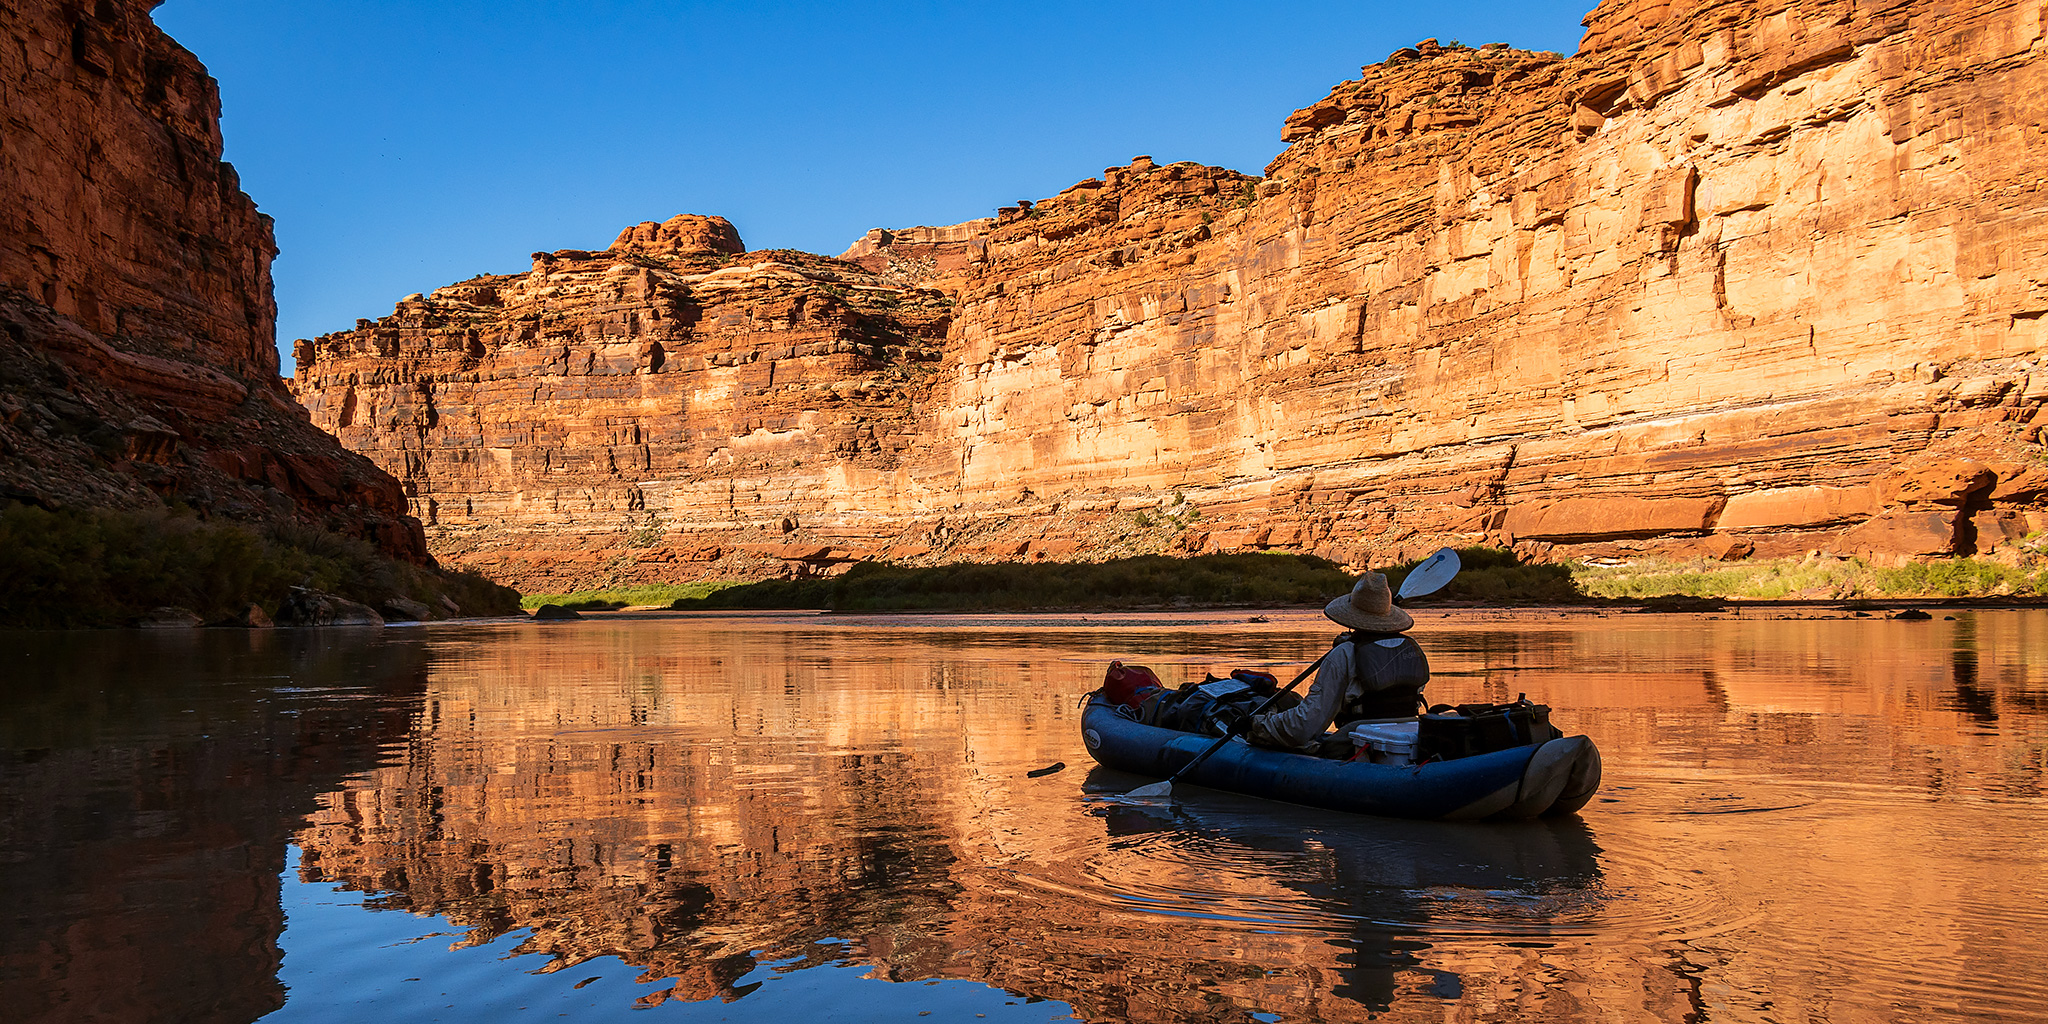 Stillwater Canyon: The Green River in Canyonlands